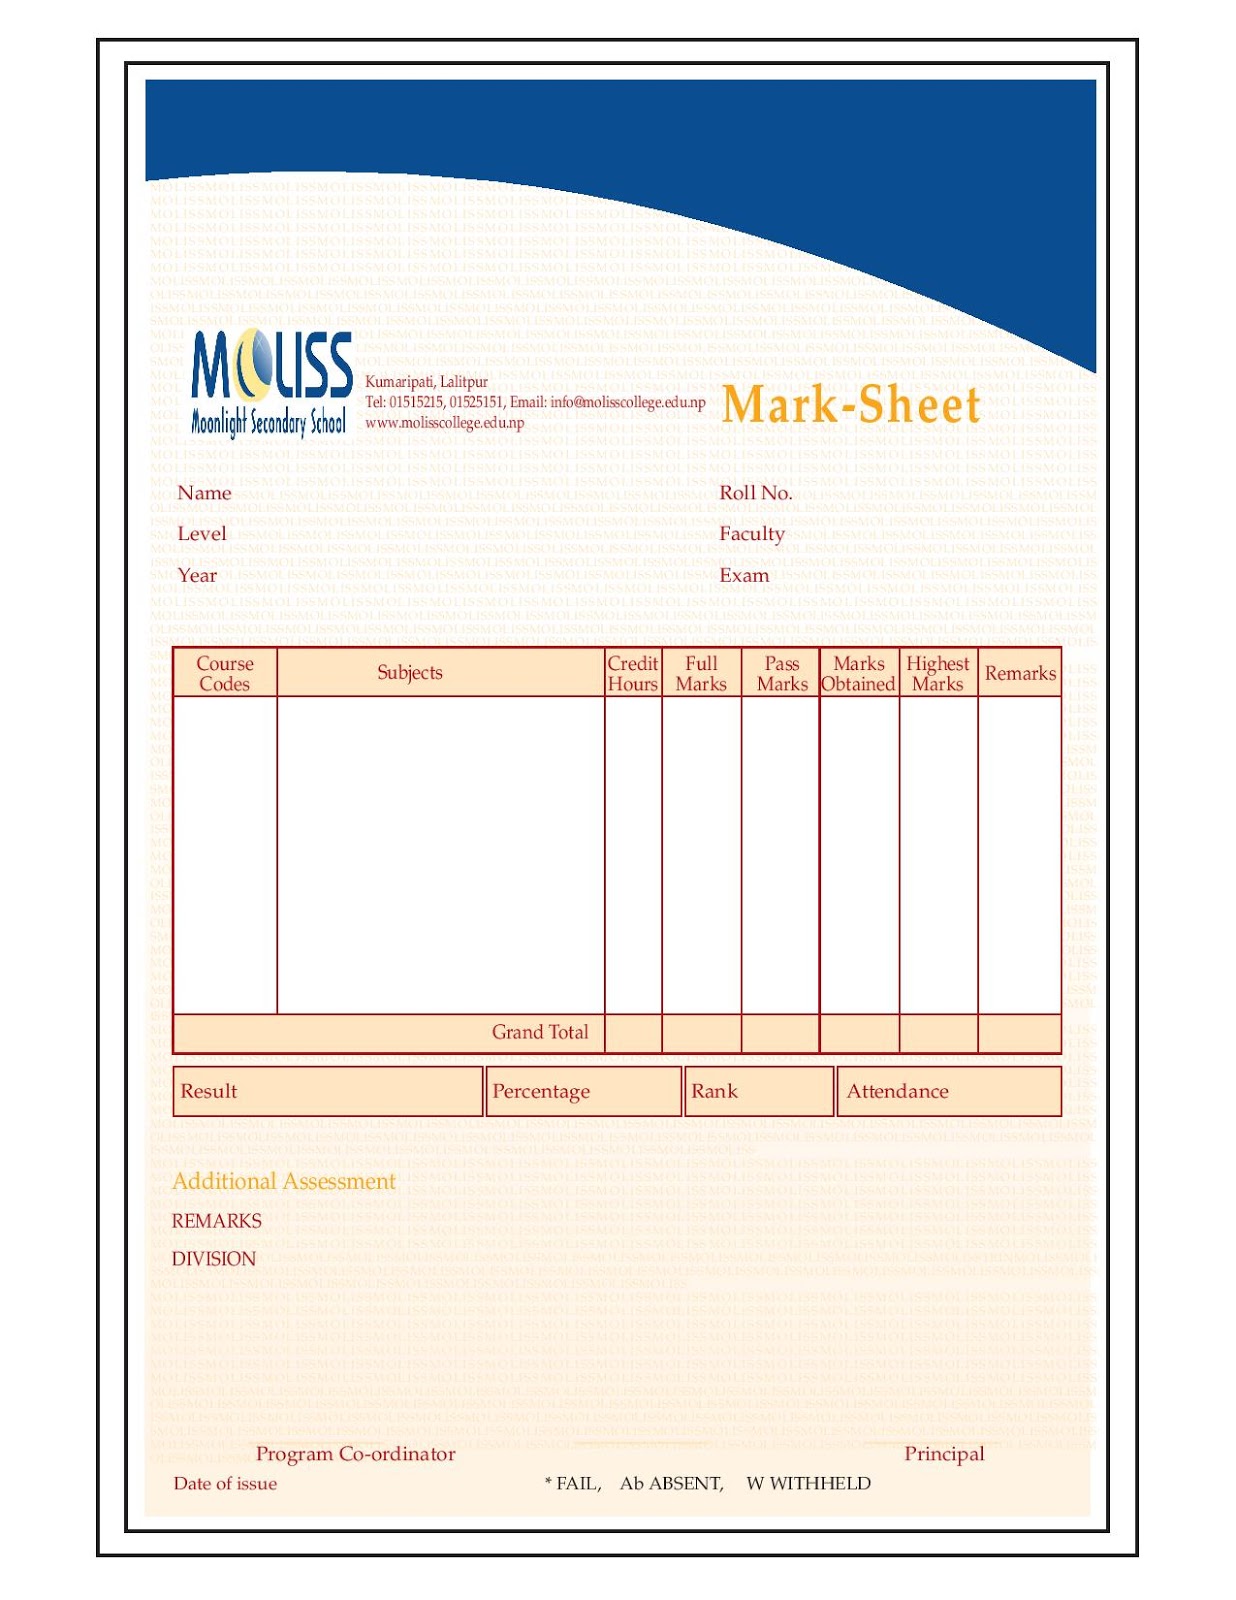 Mark sheet format for MS-WORD Lab Assignment